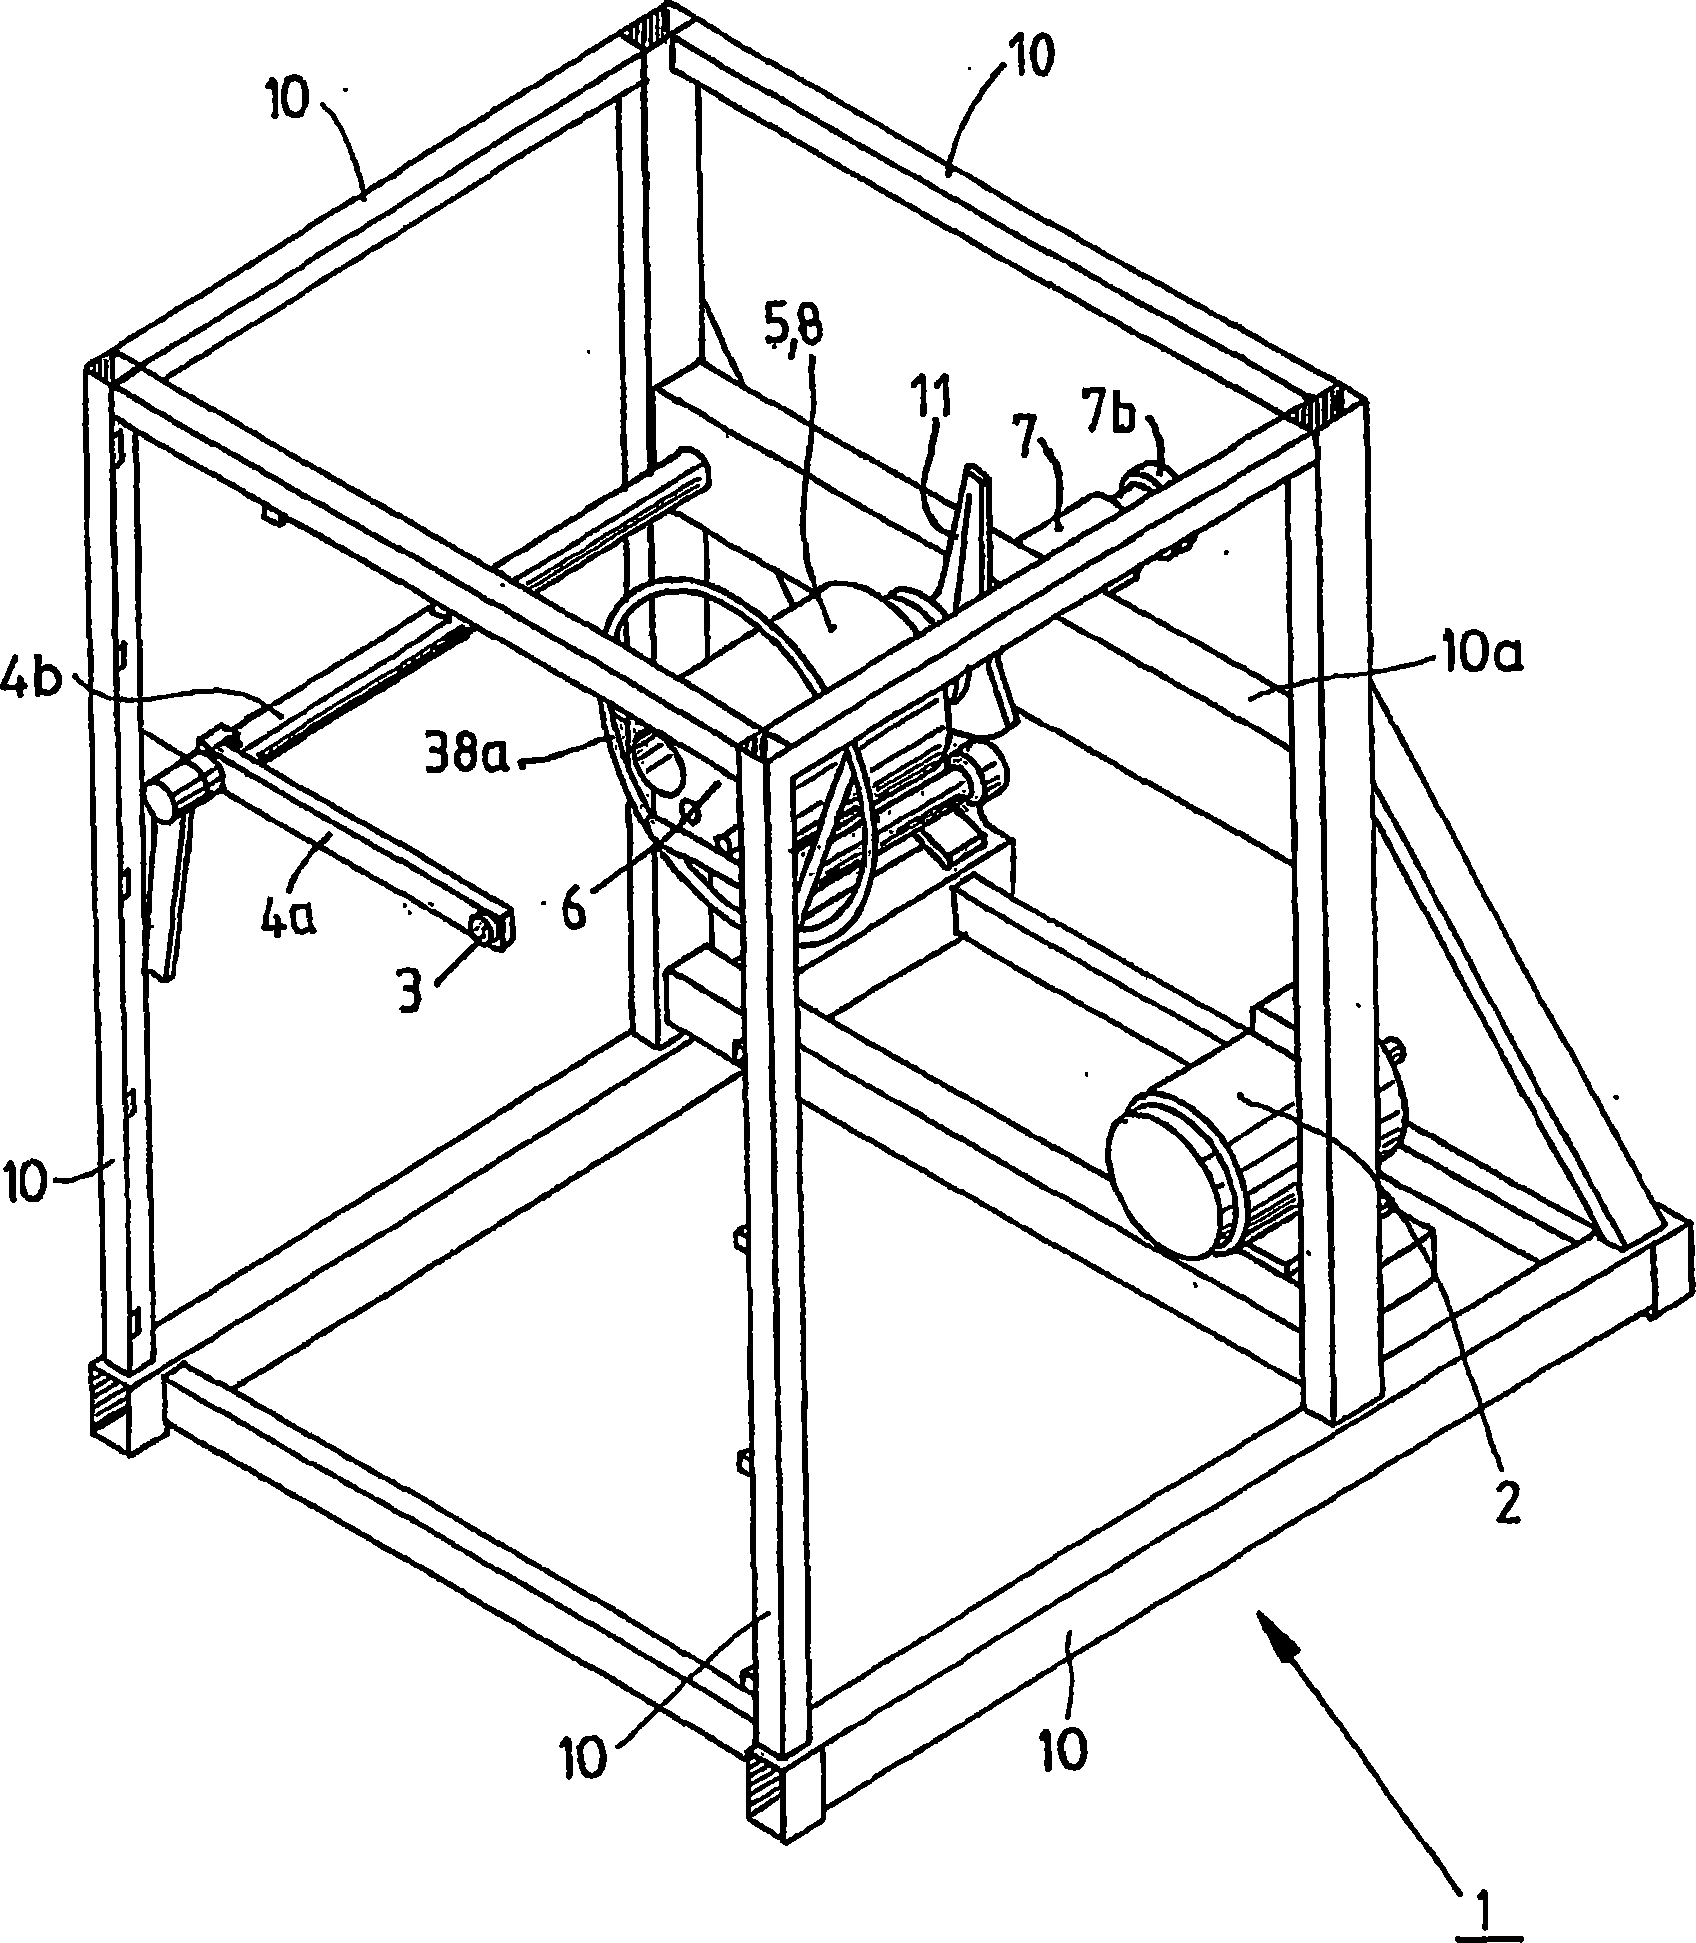 Device for winding an elongate, threadlike element on a winding element